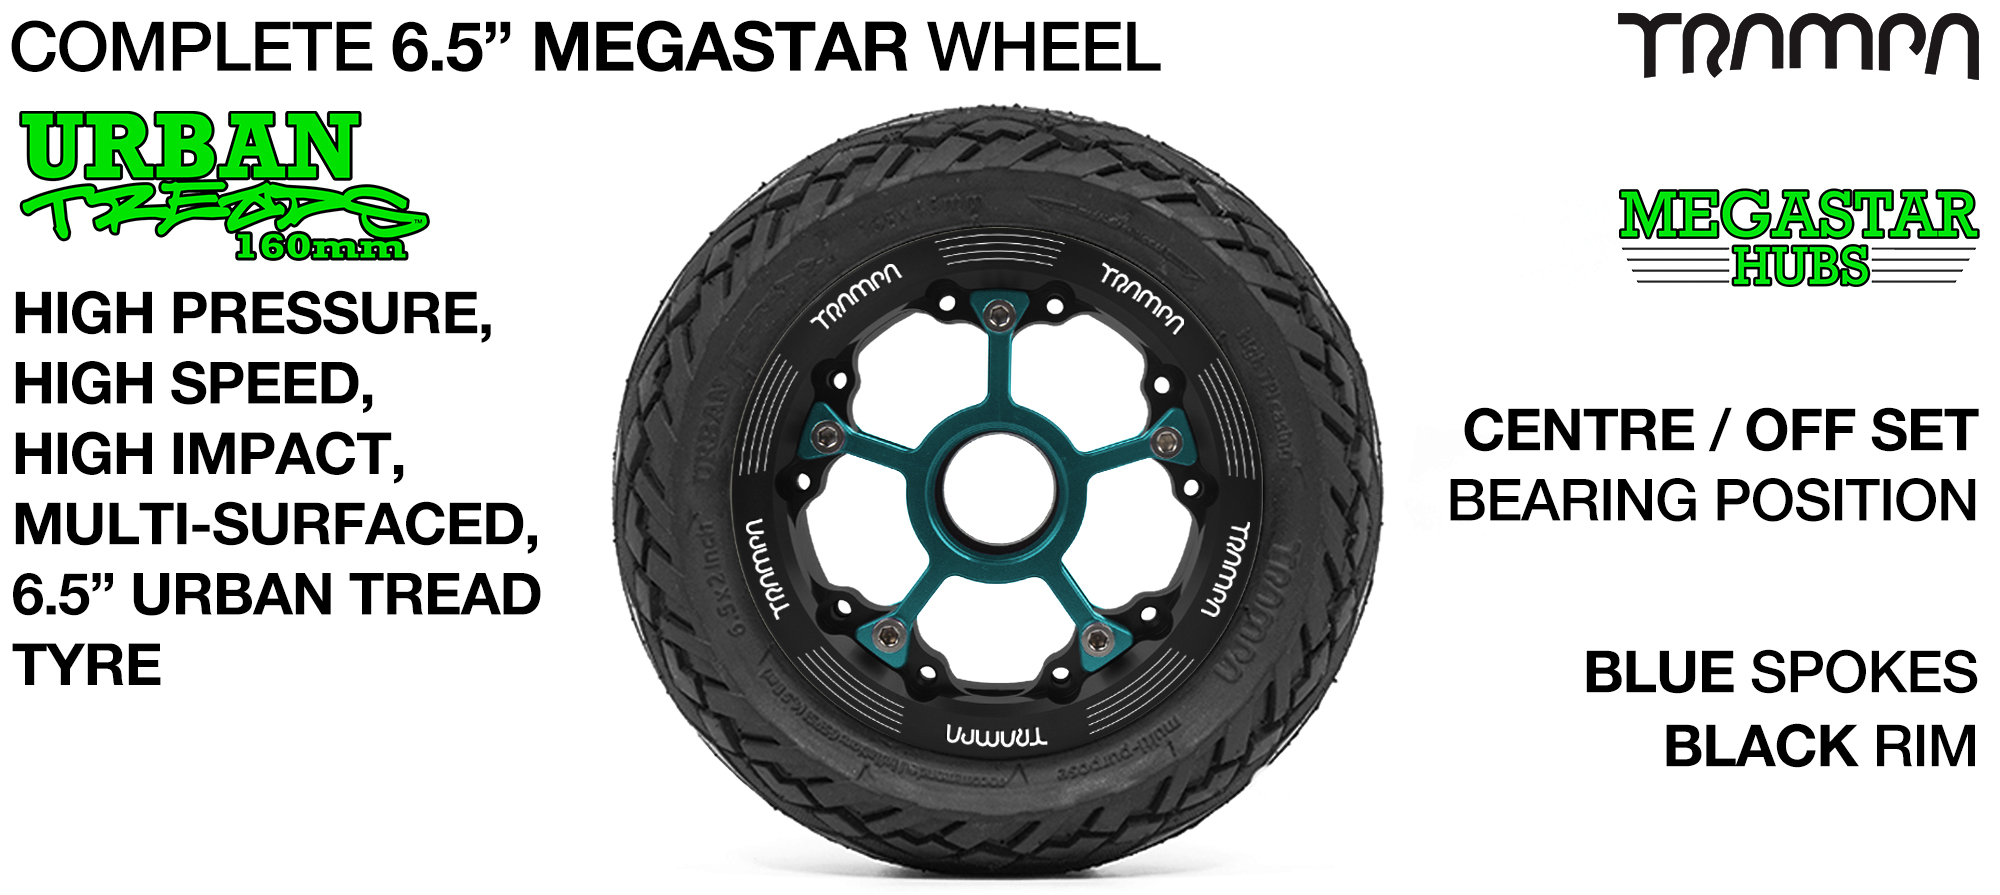 CENTER-SET MEGASTAR 8 Hub with BLACK Rims & BLUE Spokes with the amazing Low Profile 6.5 Inch URBAN Treads Tyres 